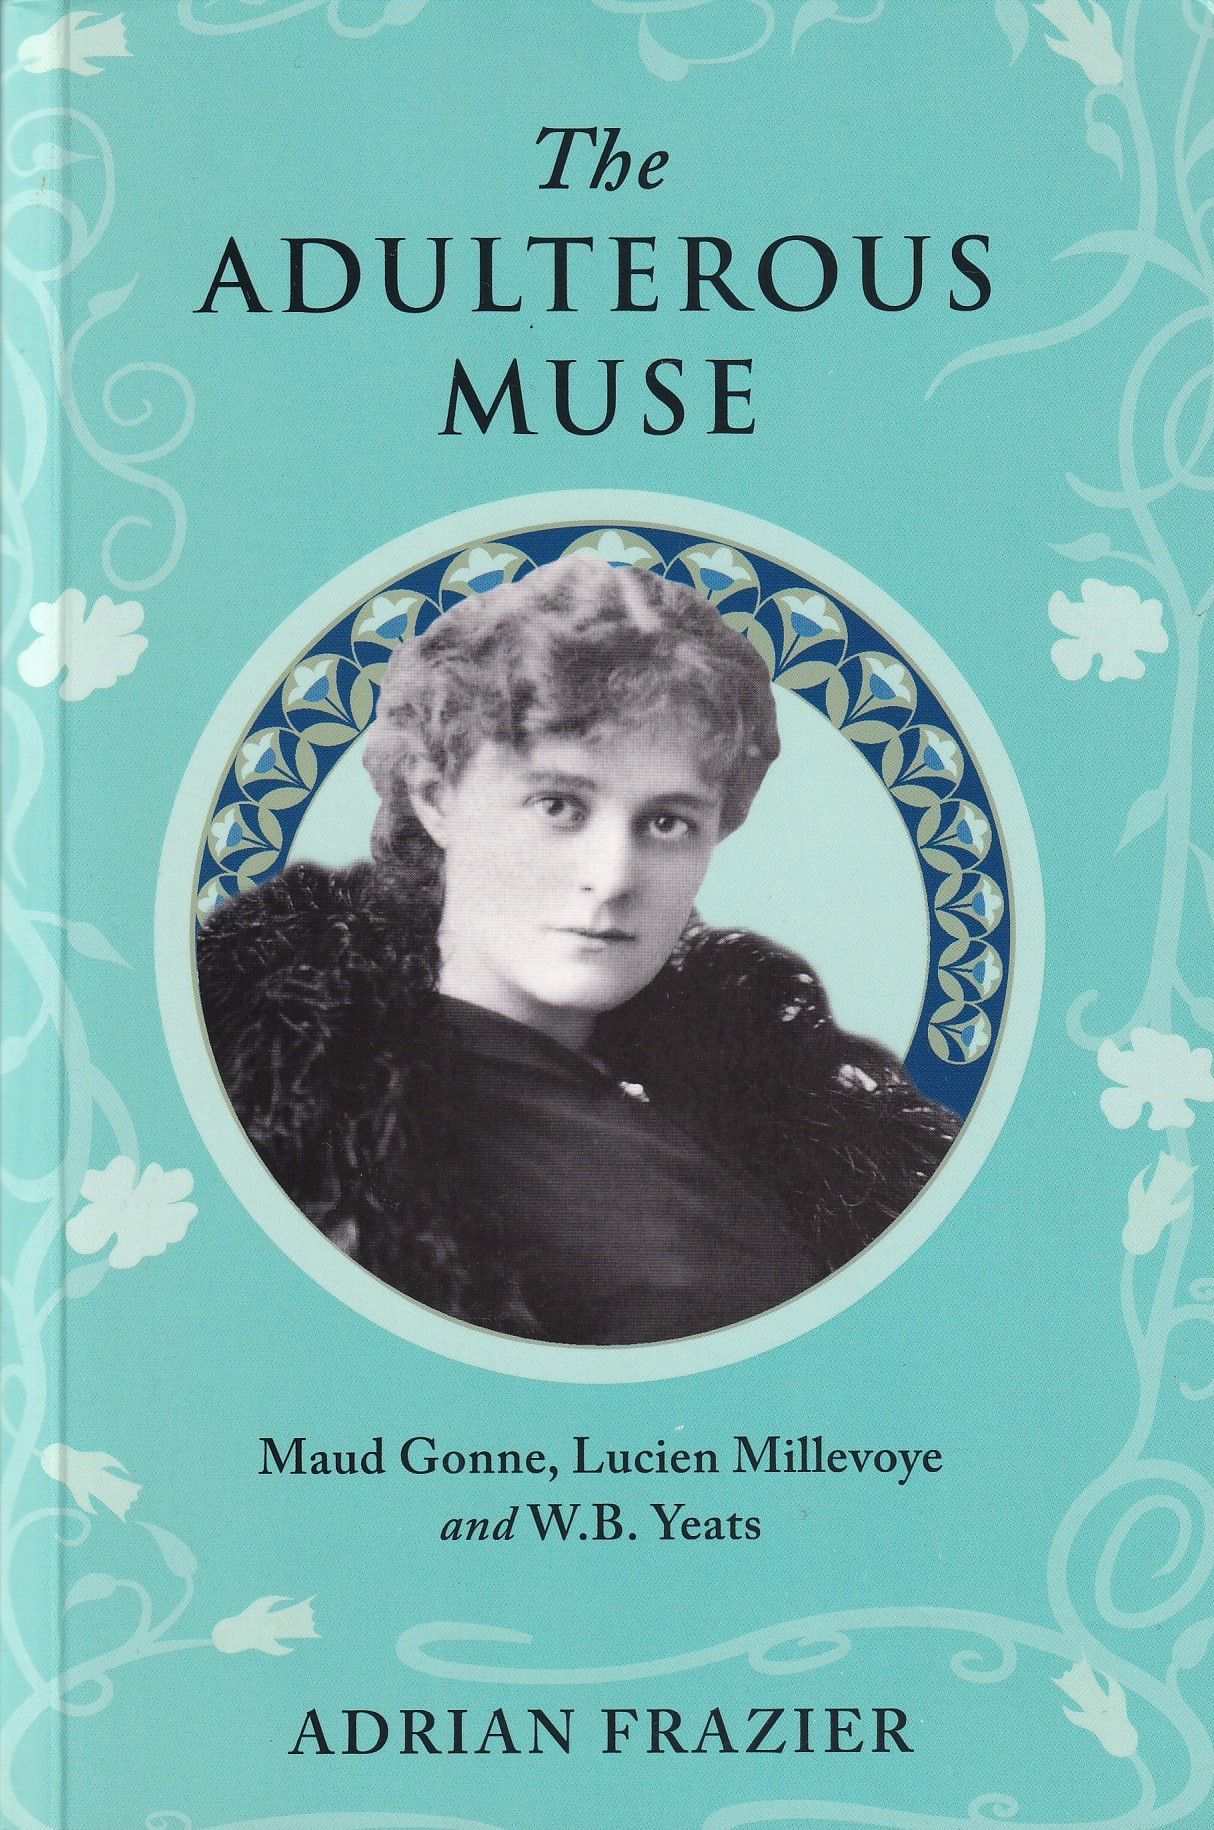 The Adulterous Muse: Maude Gonne, Lucien Millevoye and W.B. Yeats [Signed] by Adrian Frazier